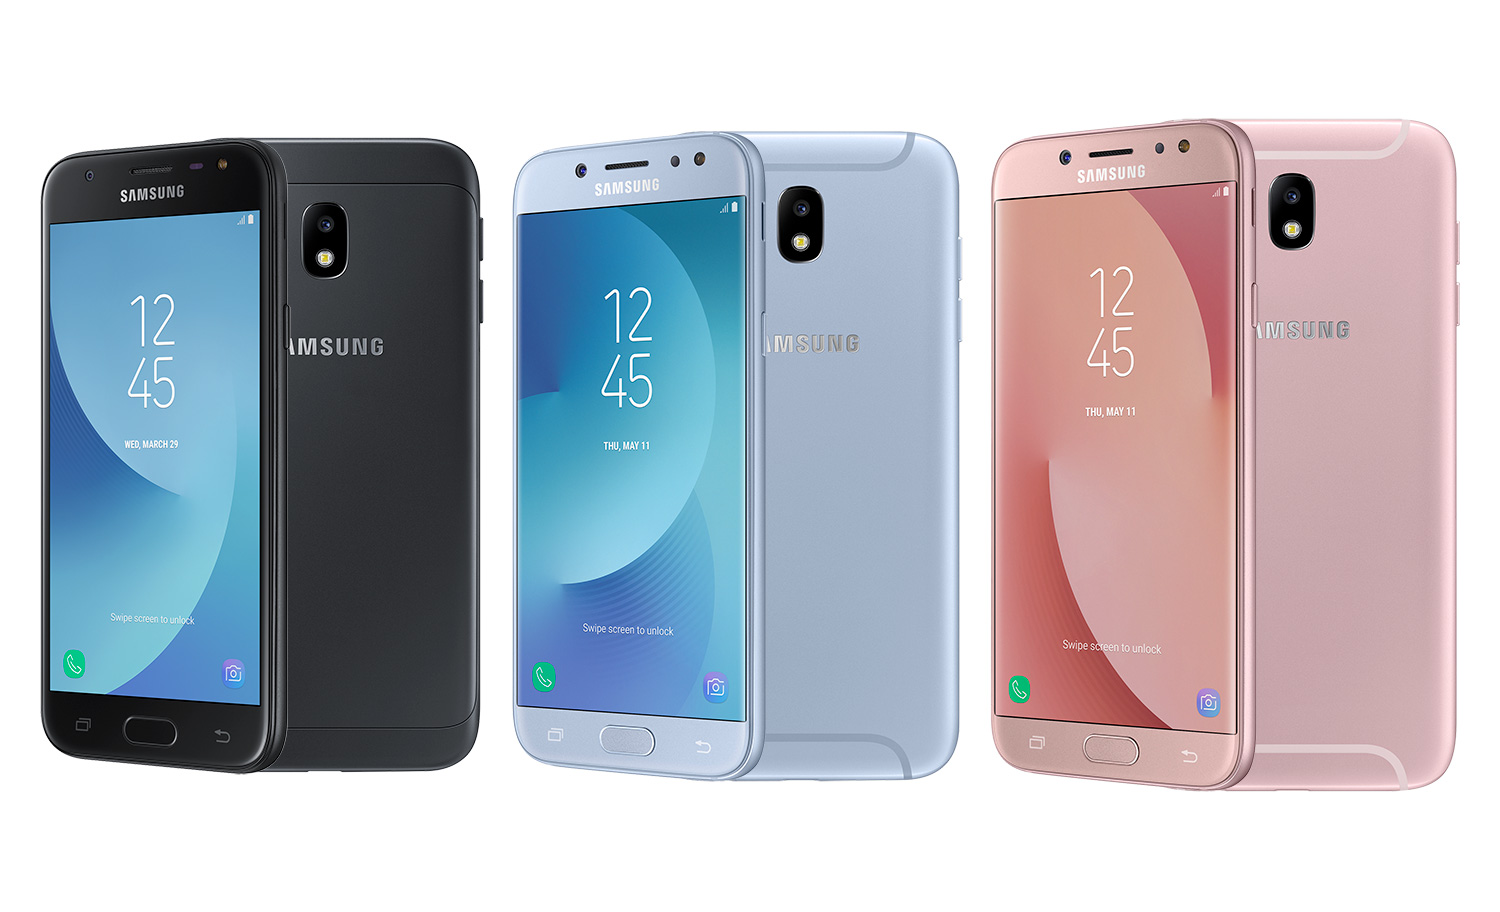 Samsung Galaxy J Pro Series (2017) Now Available in Malaysia